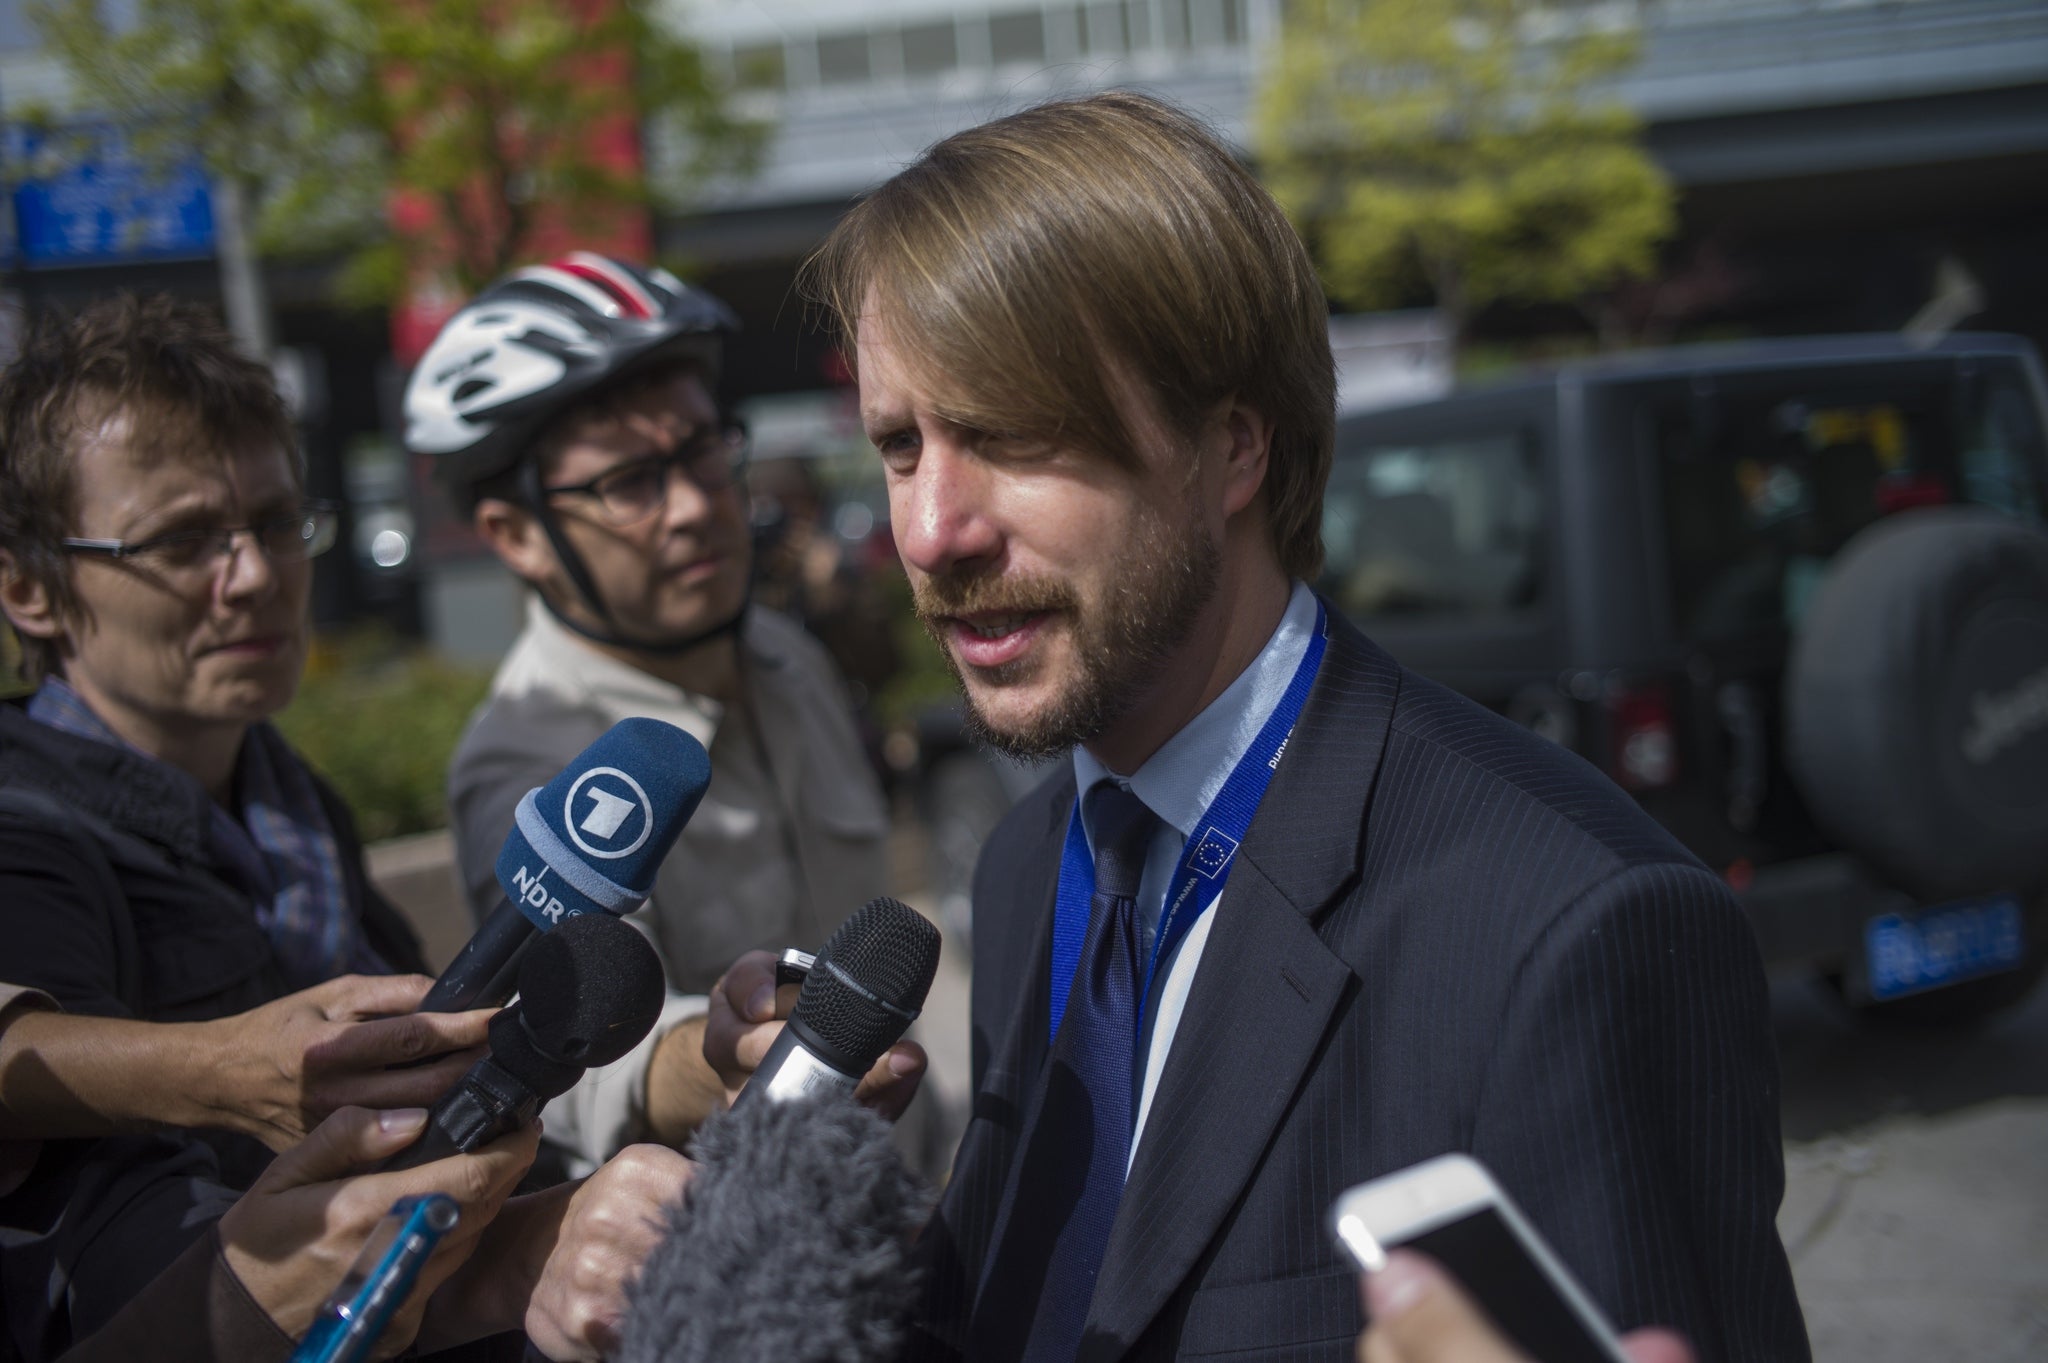 Raphael Droszewski, first secretary of Political Affairs at the European Union, talks to journalists after the trial, saying the trial has heightened the EU's concerns over the situation of human rights defenders in China